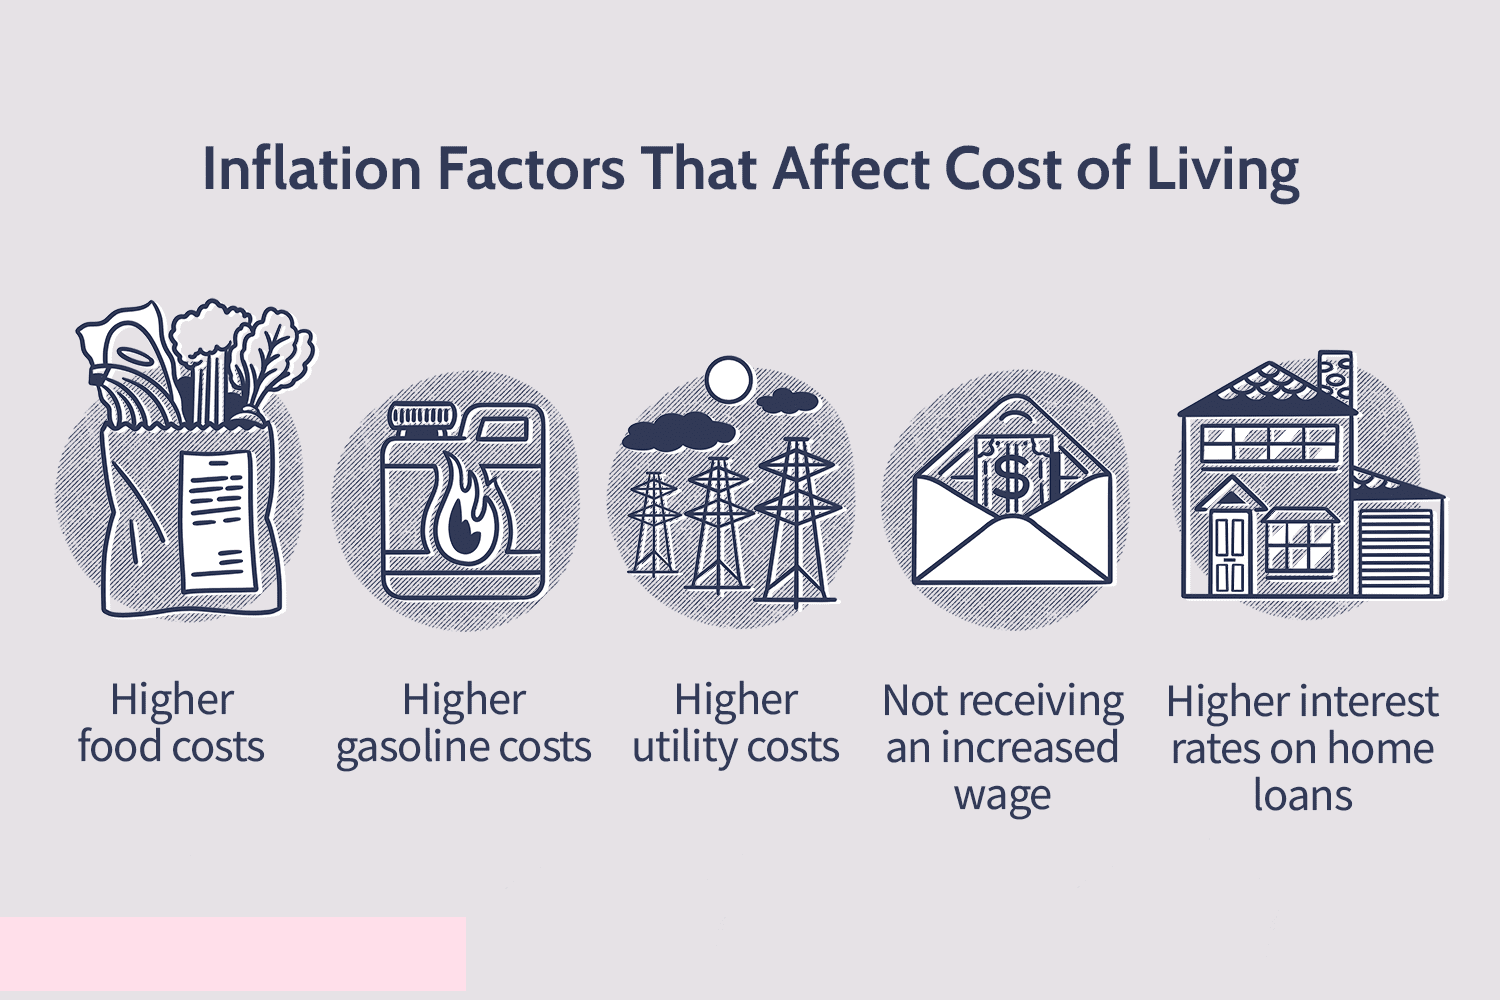 Inflation factors that affect cost of living